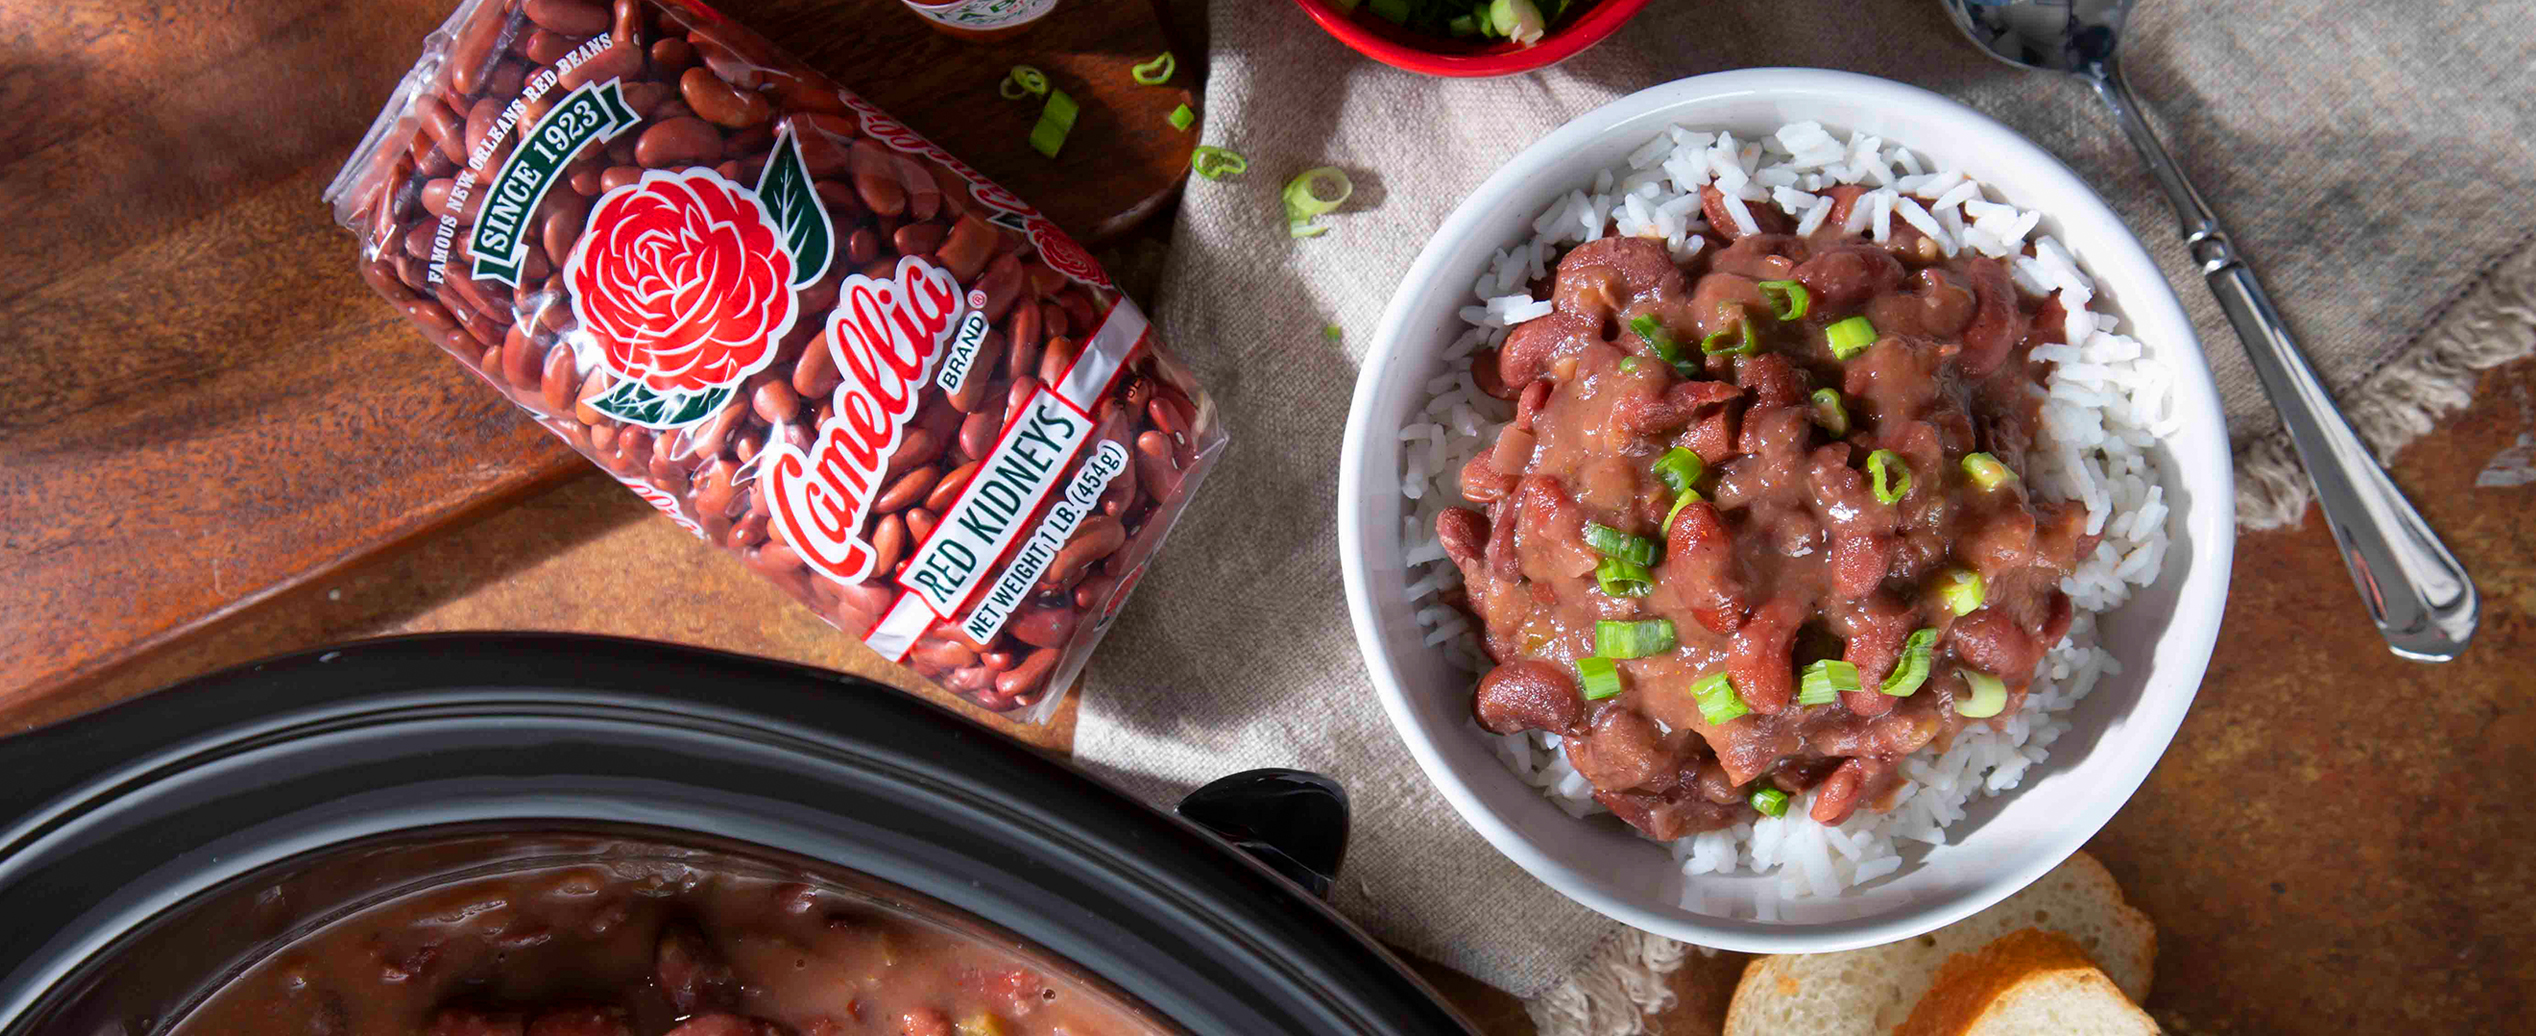 Camellia Brand Red Kidney Beans in a package next to a bowl of red beans and rice